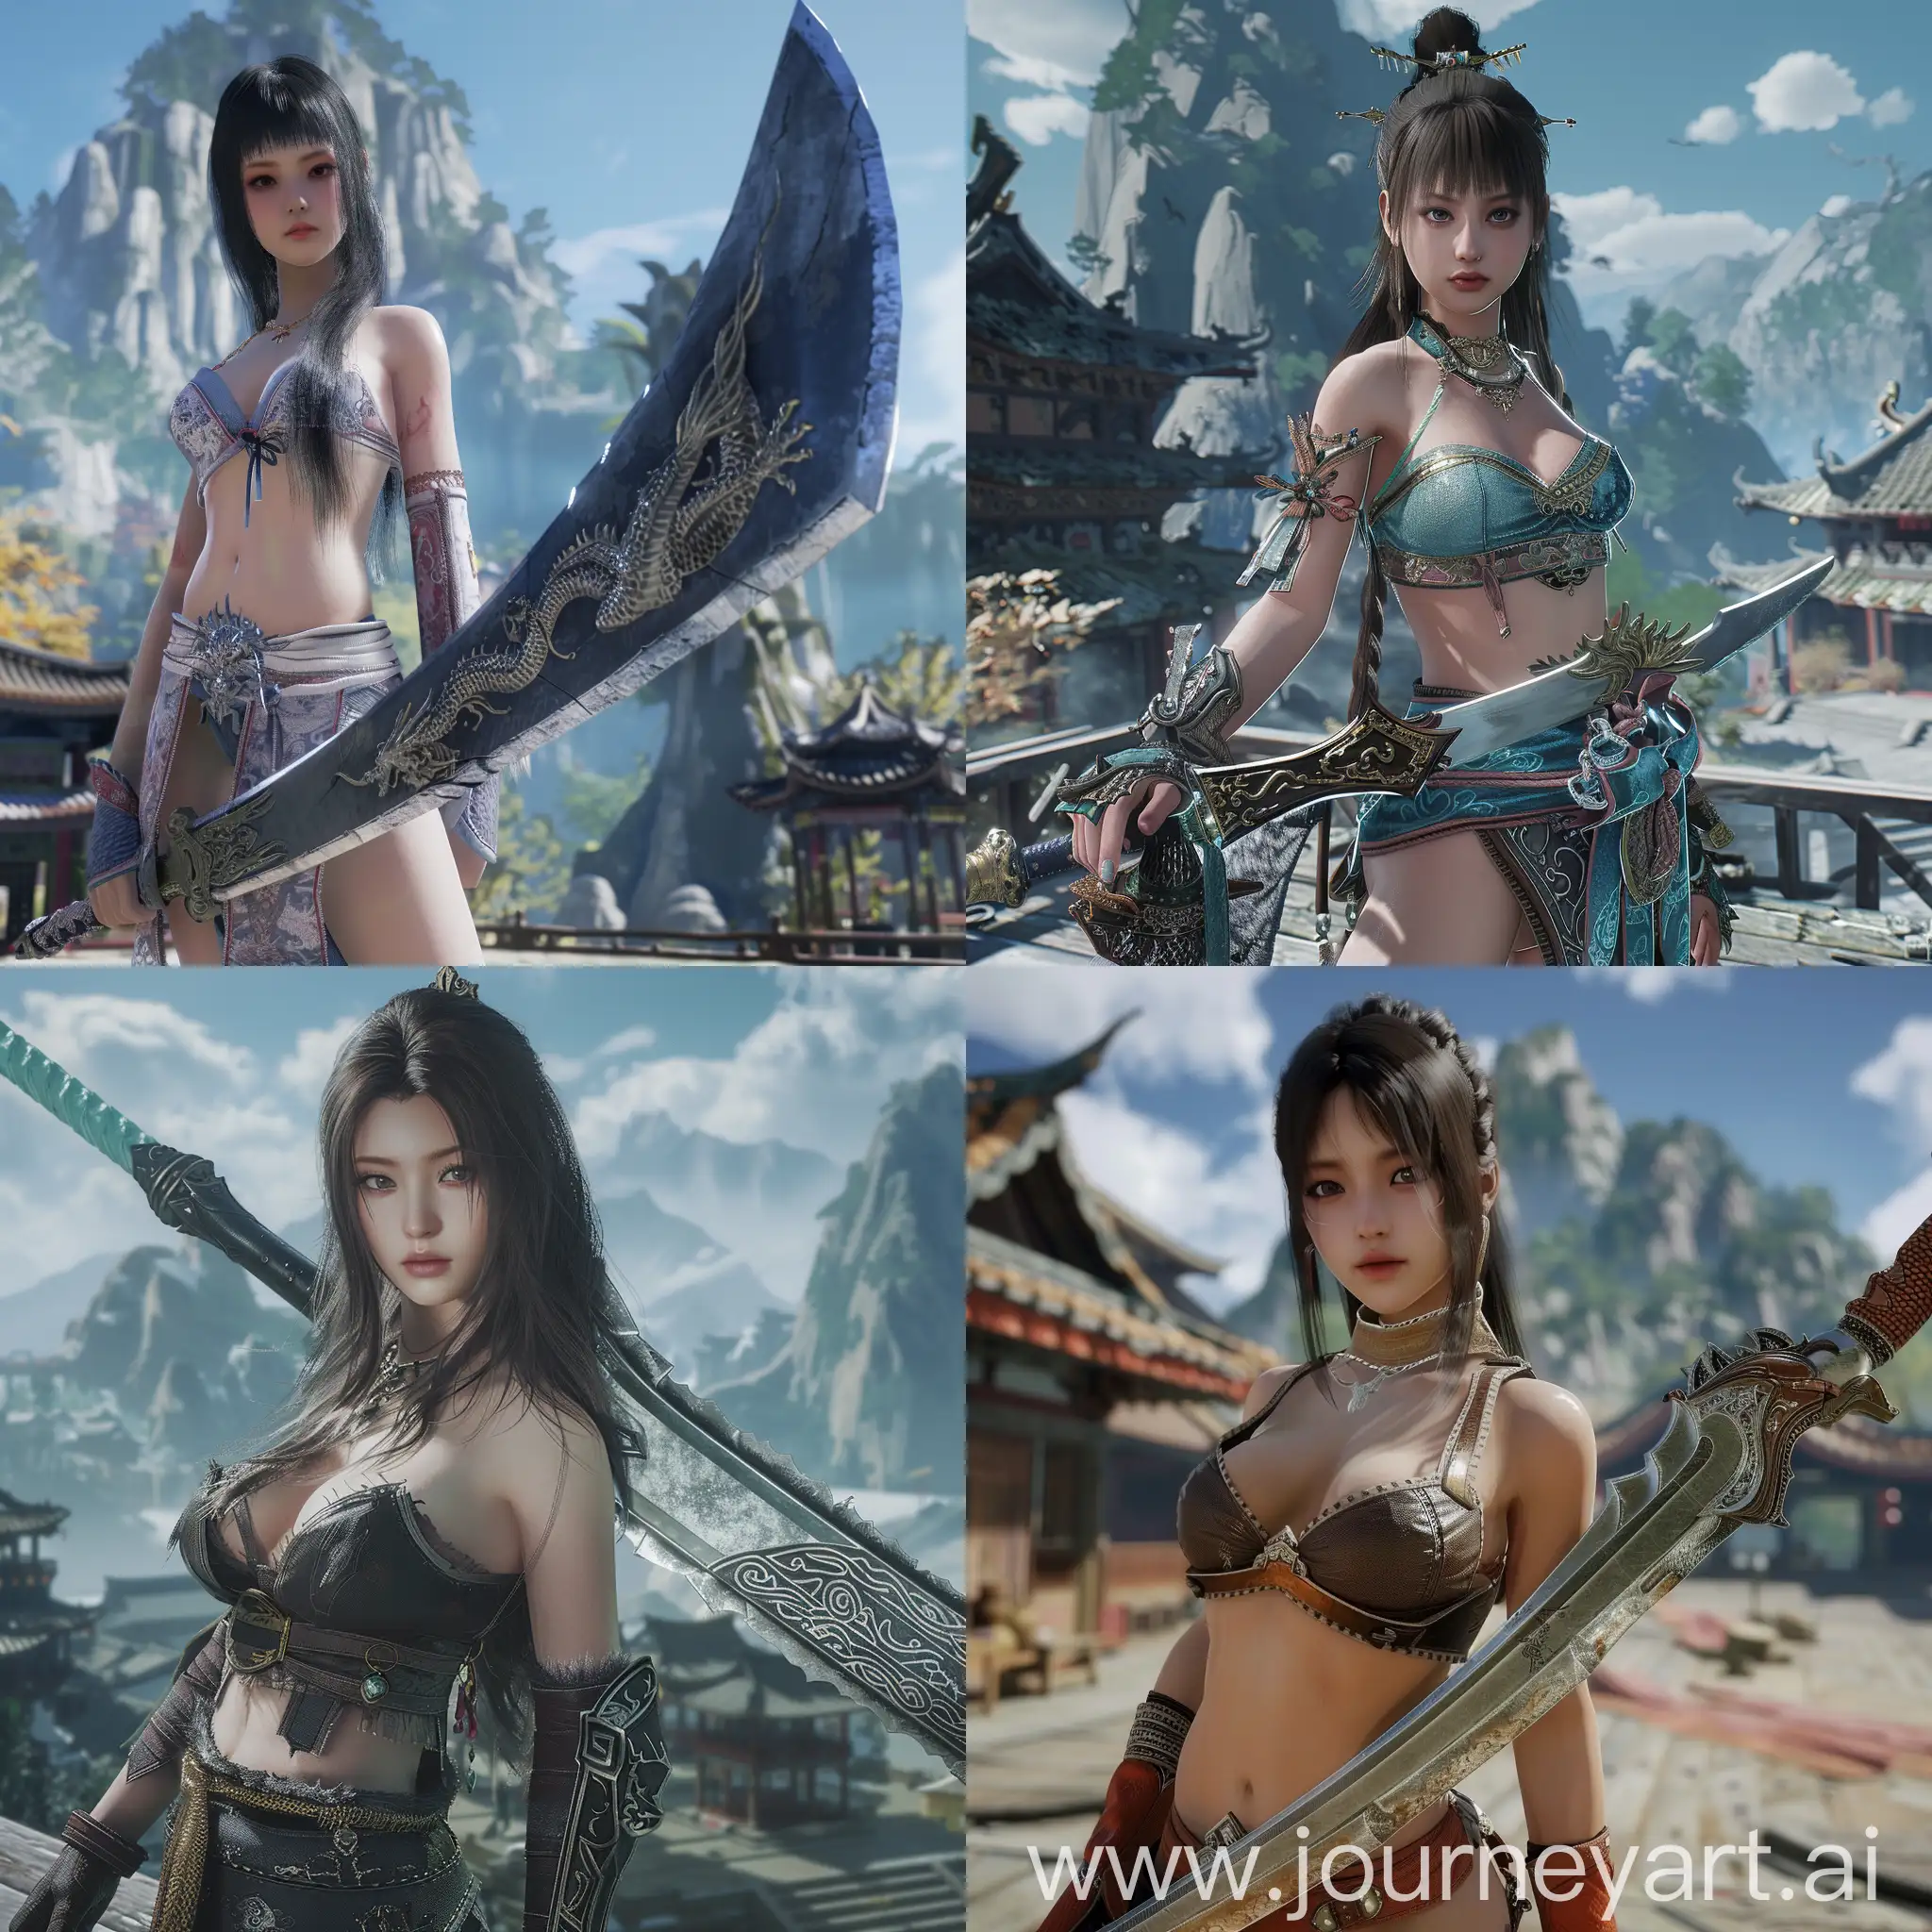 background mountain.in the sky chinese Dragon color azure.in the village beatiful low-cut attractive girl.she one hand a thick and big sword weapon style mmorpg . qualtiy unreal engine 4